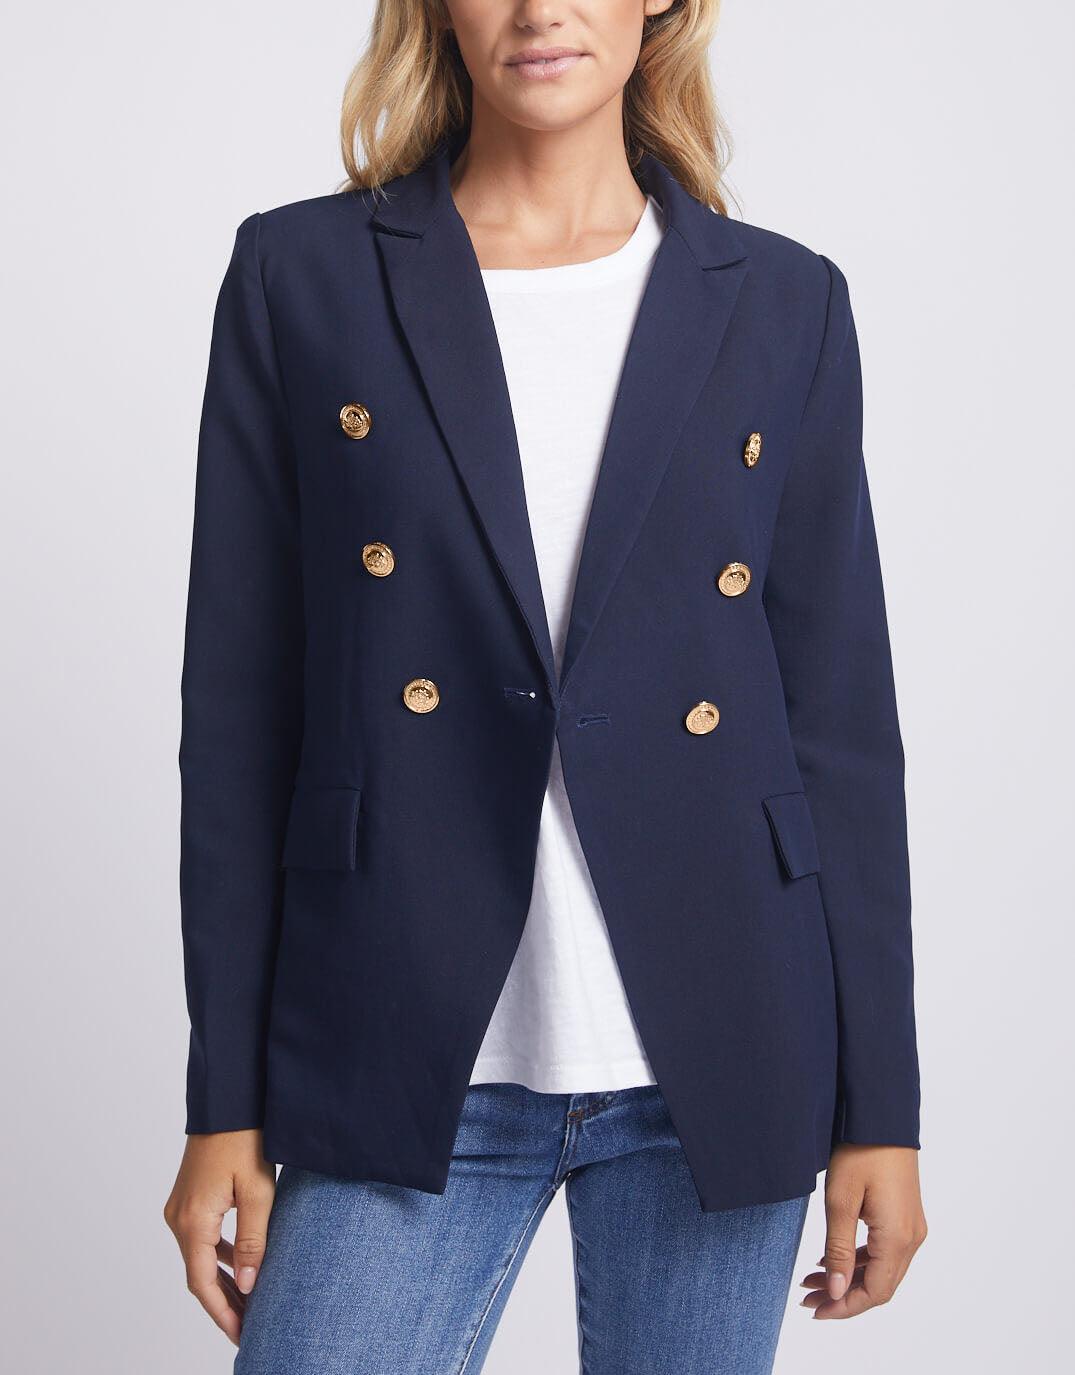 Buy PETITE Navy Double Breasted Coord Blazer 12, Blazers